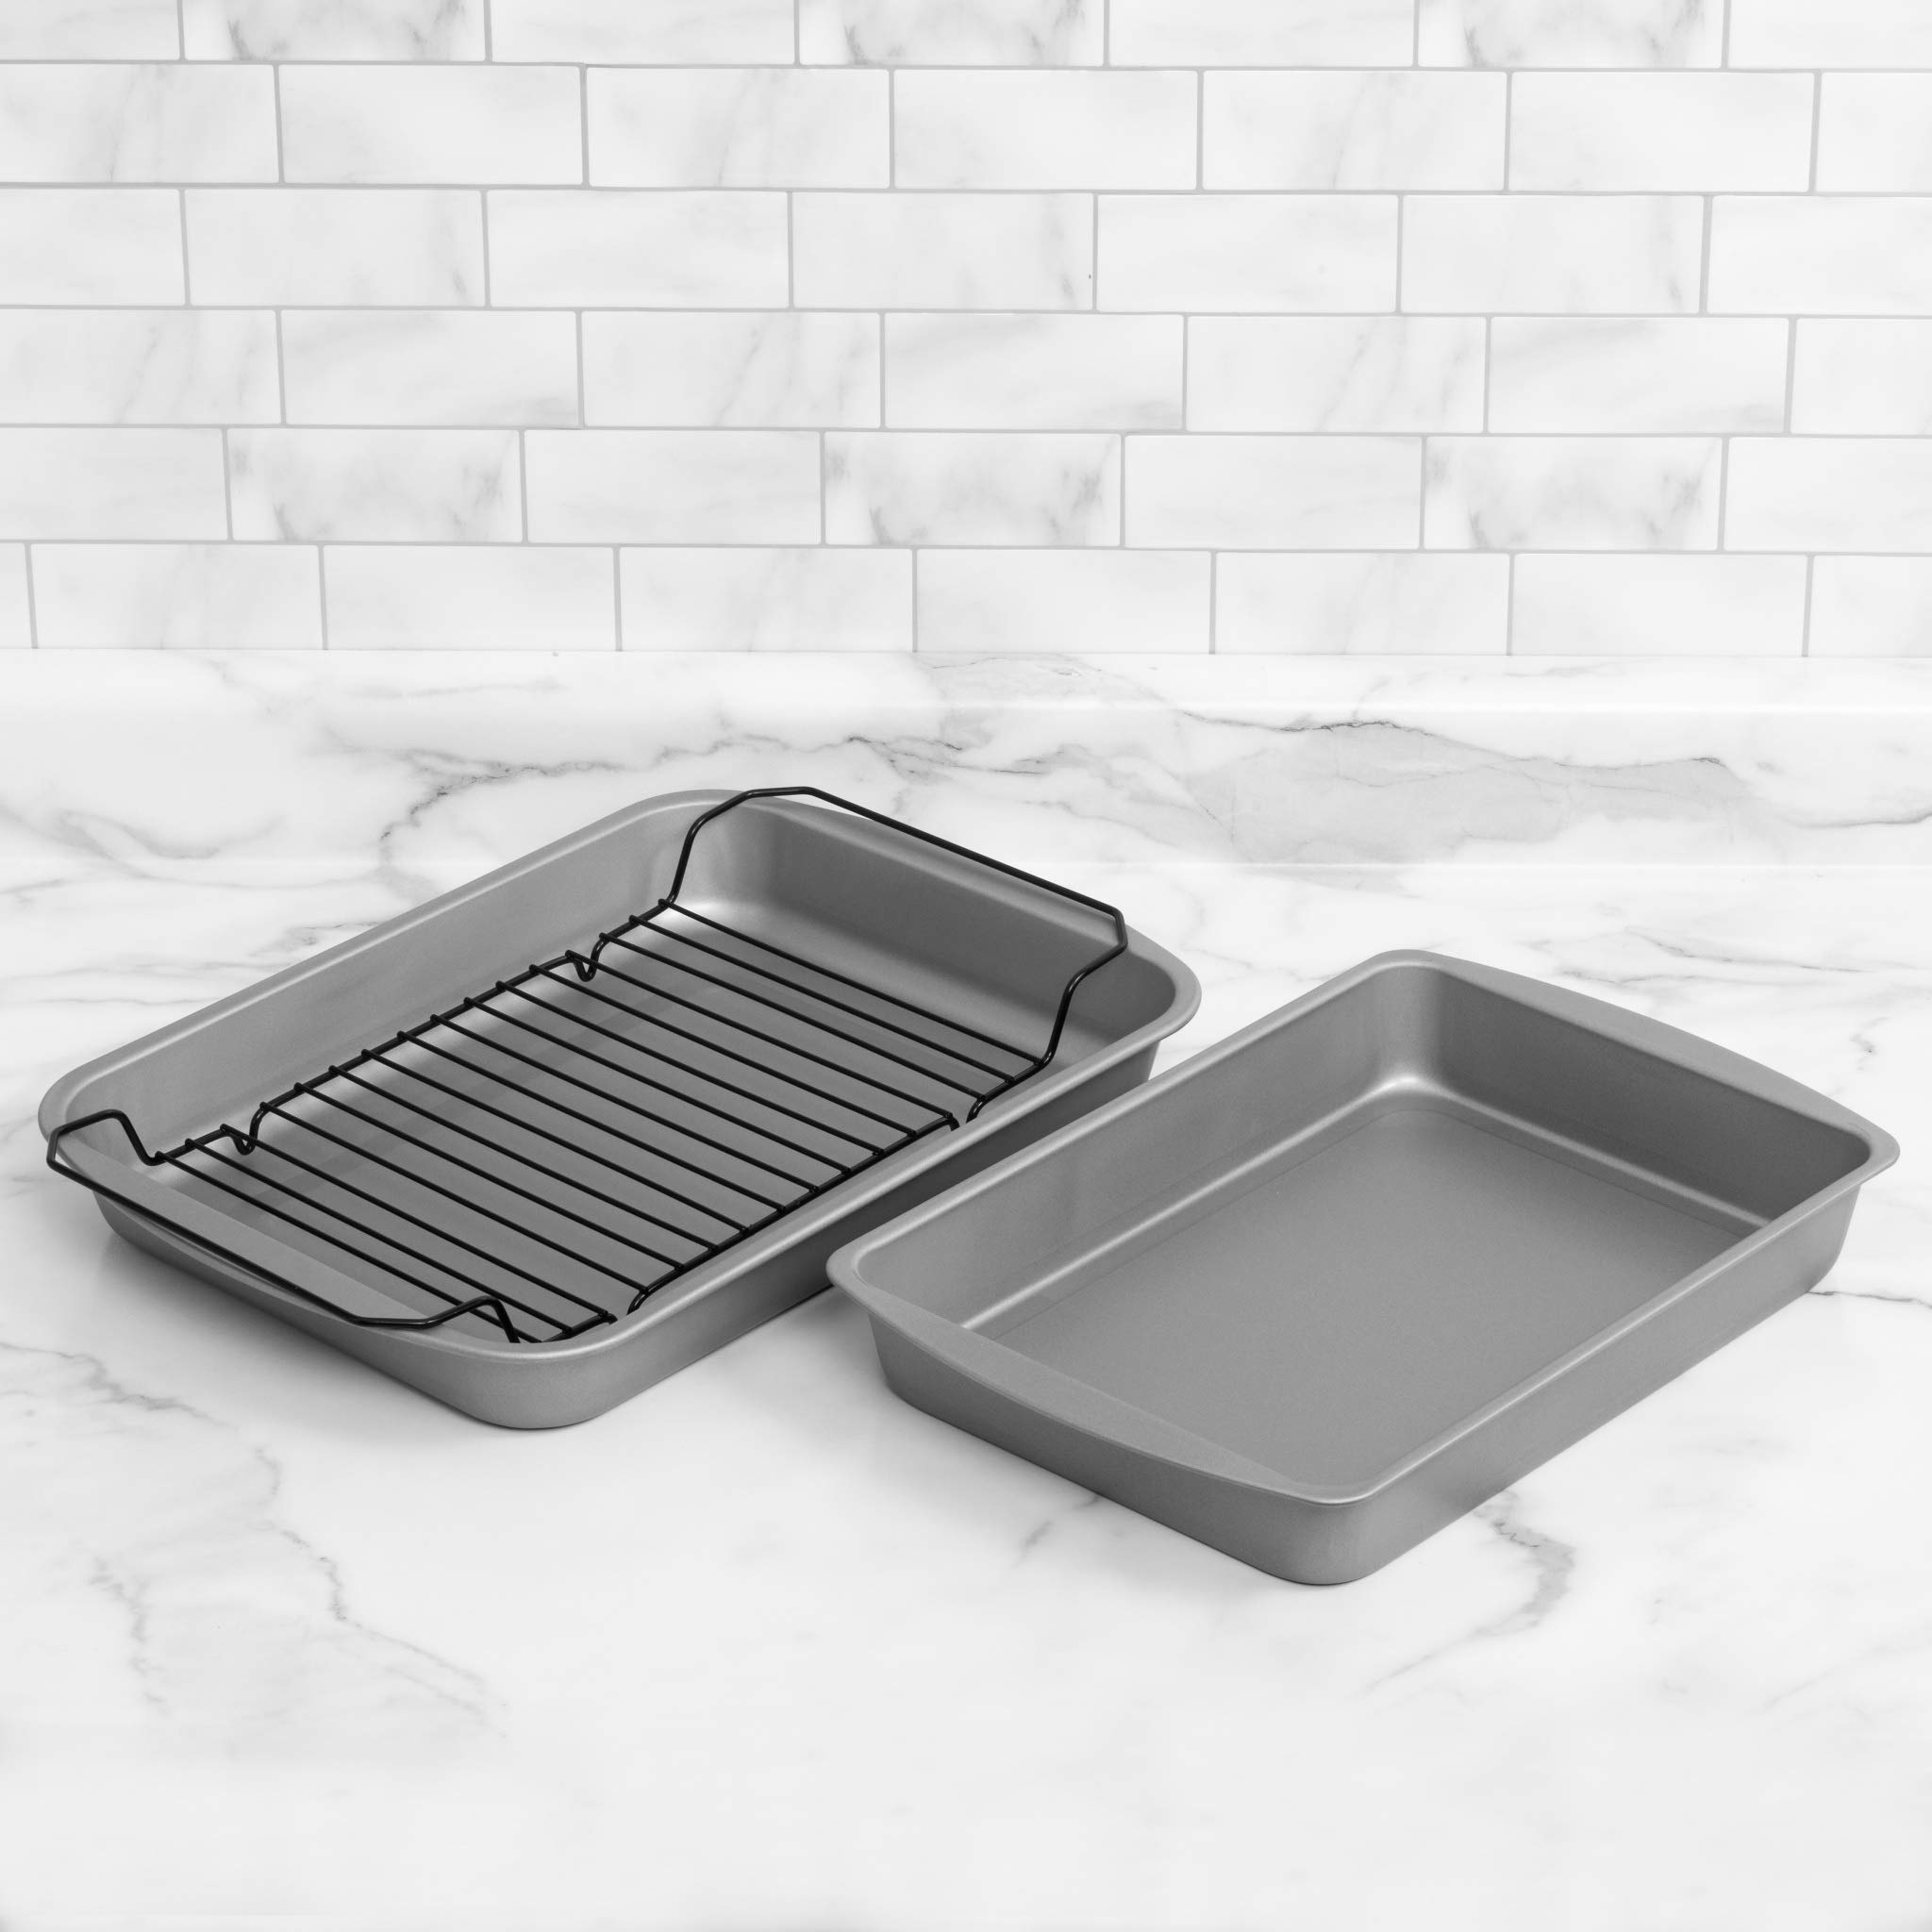 G & S Metal Products Company OvenStuff Non-Stick Baking, Roasting Pan Chrome Broiler Rack, 3-Piece Set, Grey